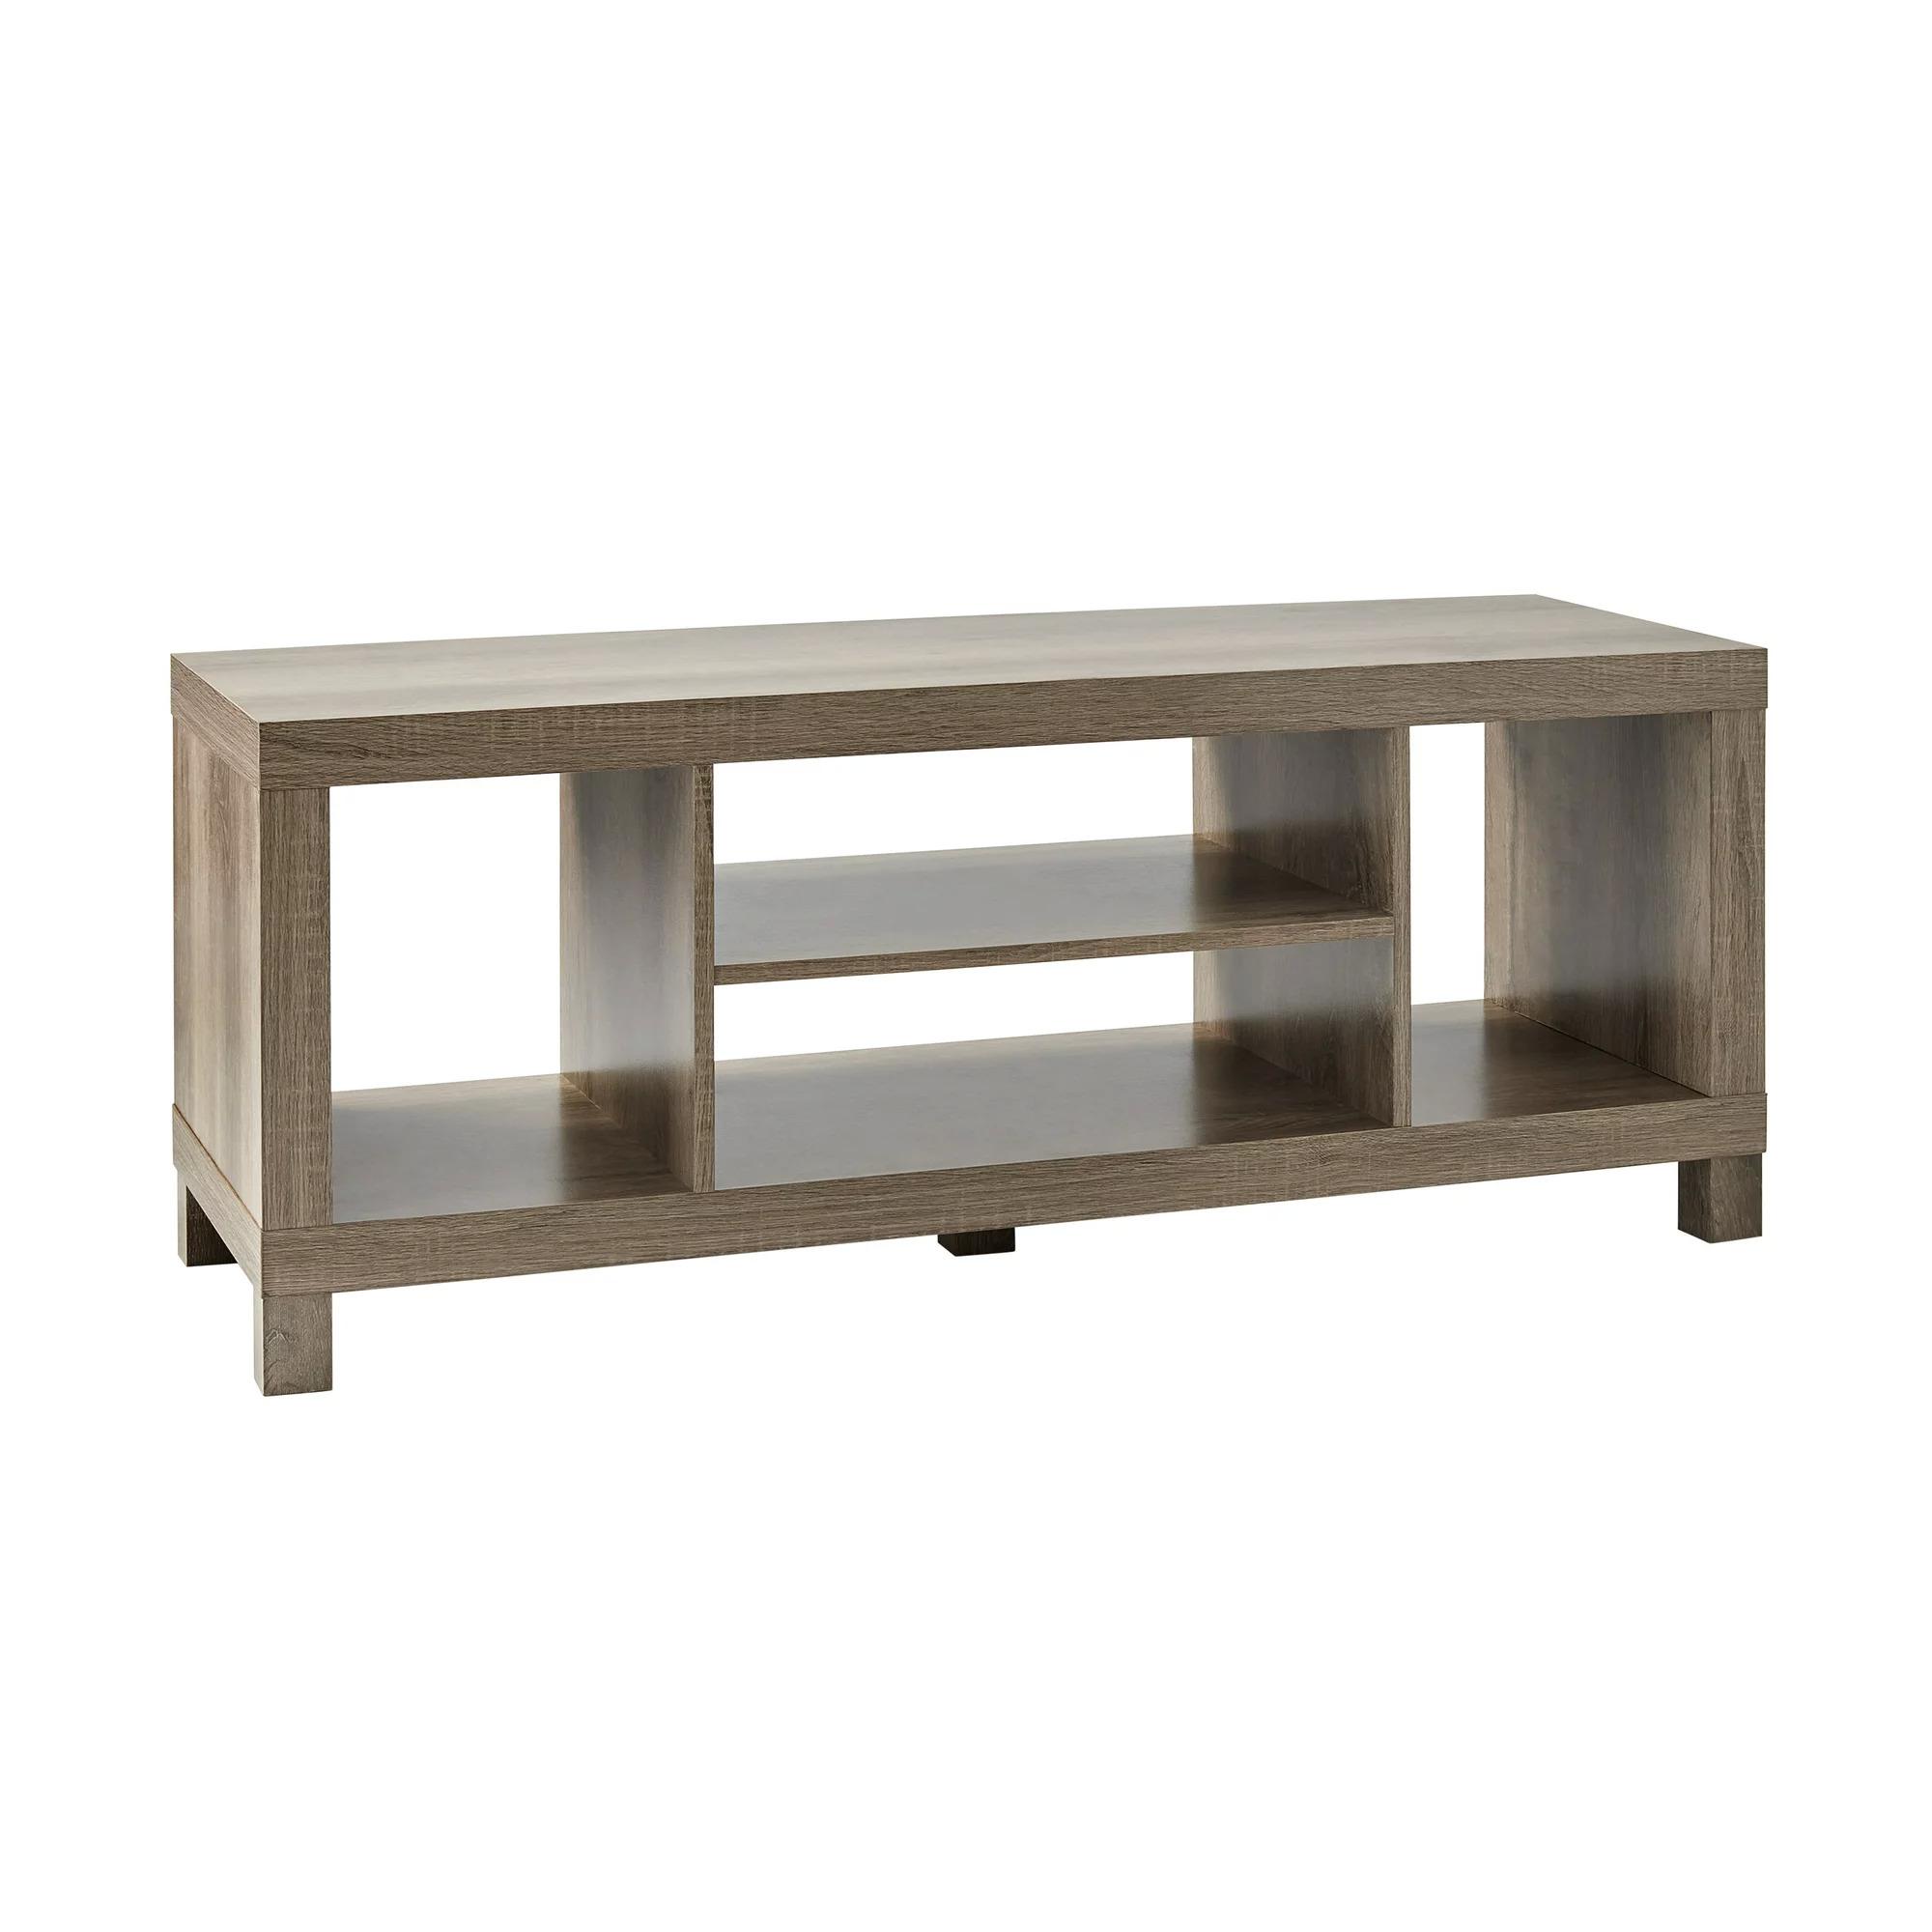 Mainstays TV Stand for $45.98 Shipped